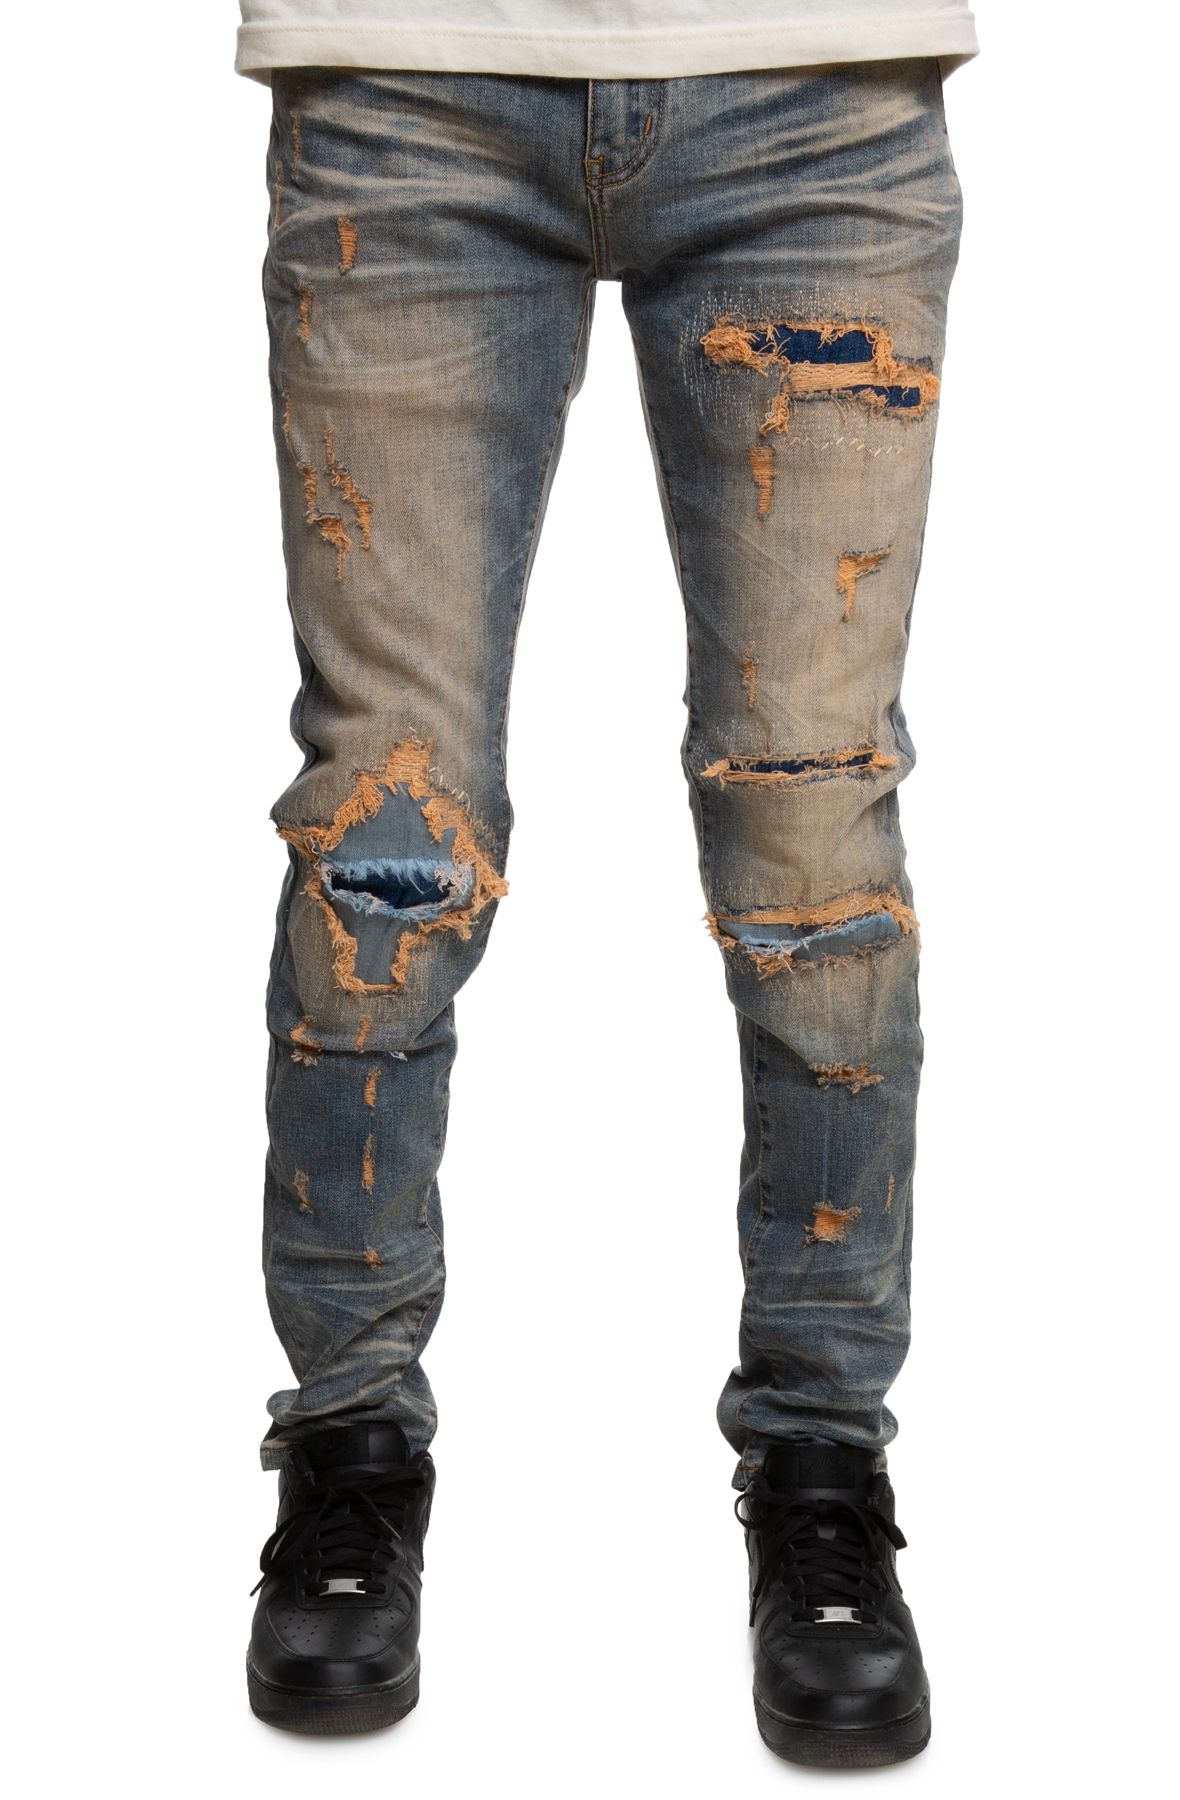 FOREIGN LOCALS Vintage Ripped Sand Jeans FL-190524 - Shiekh